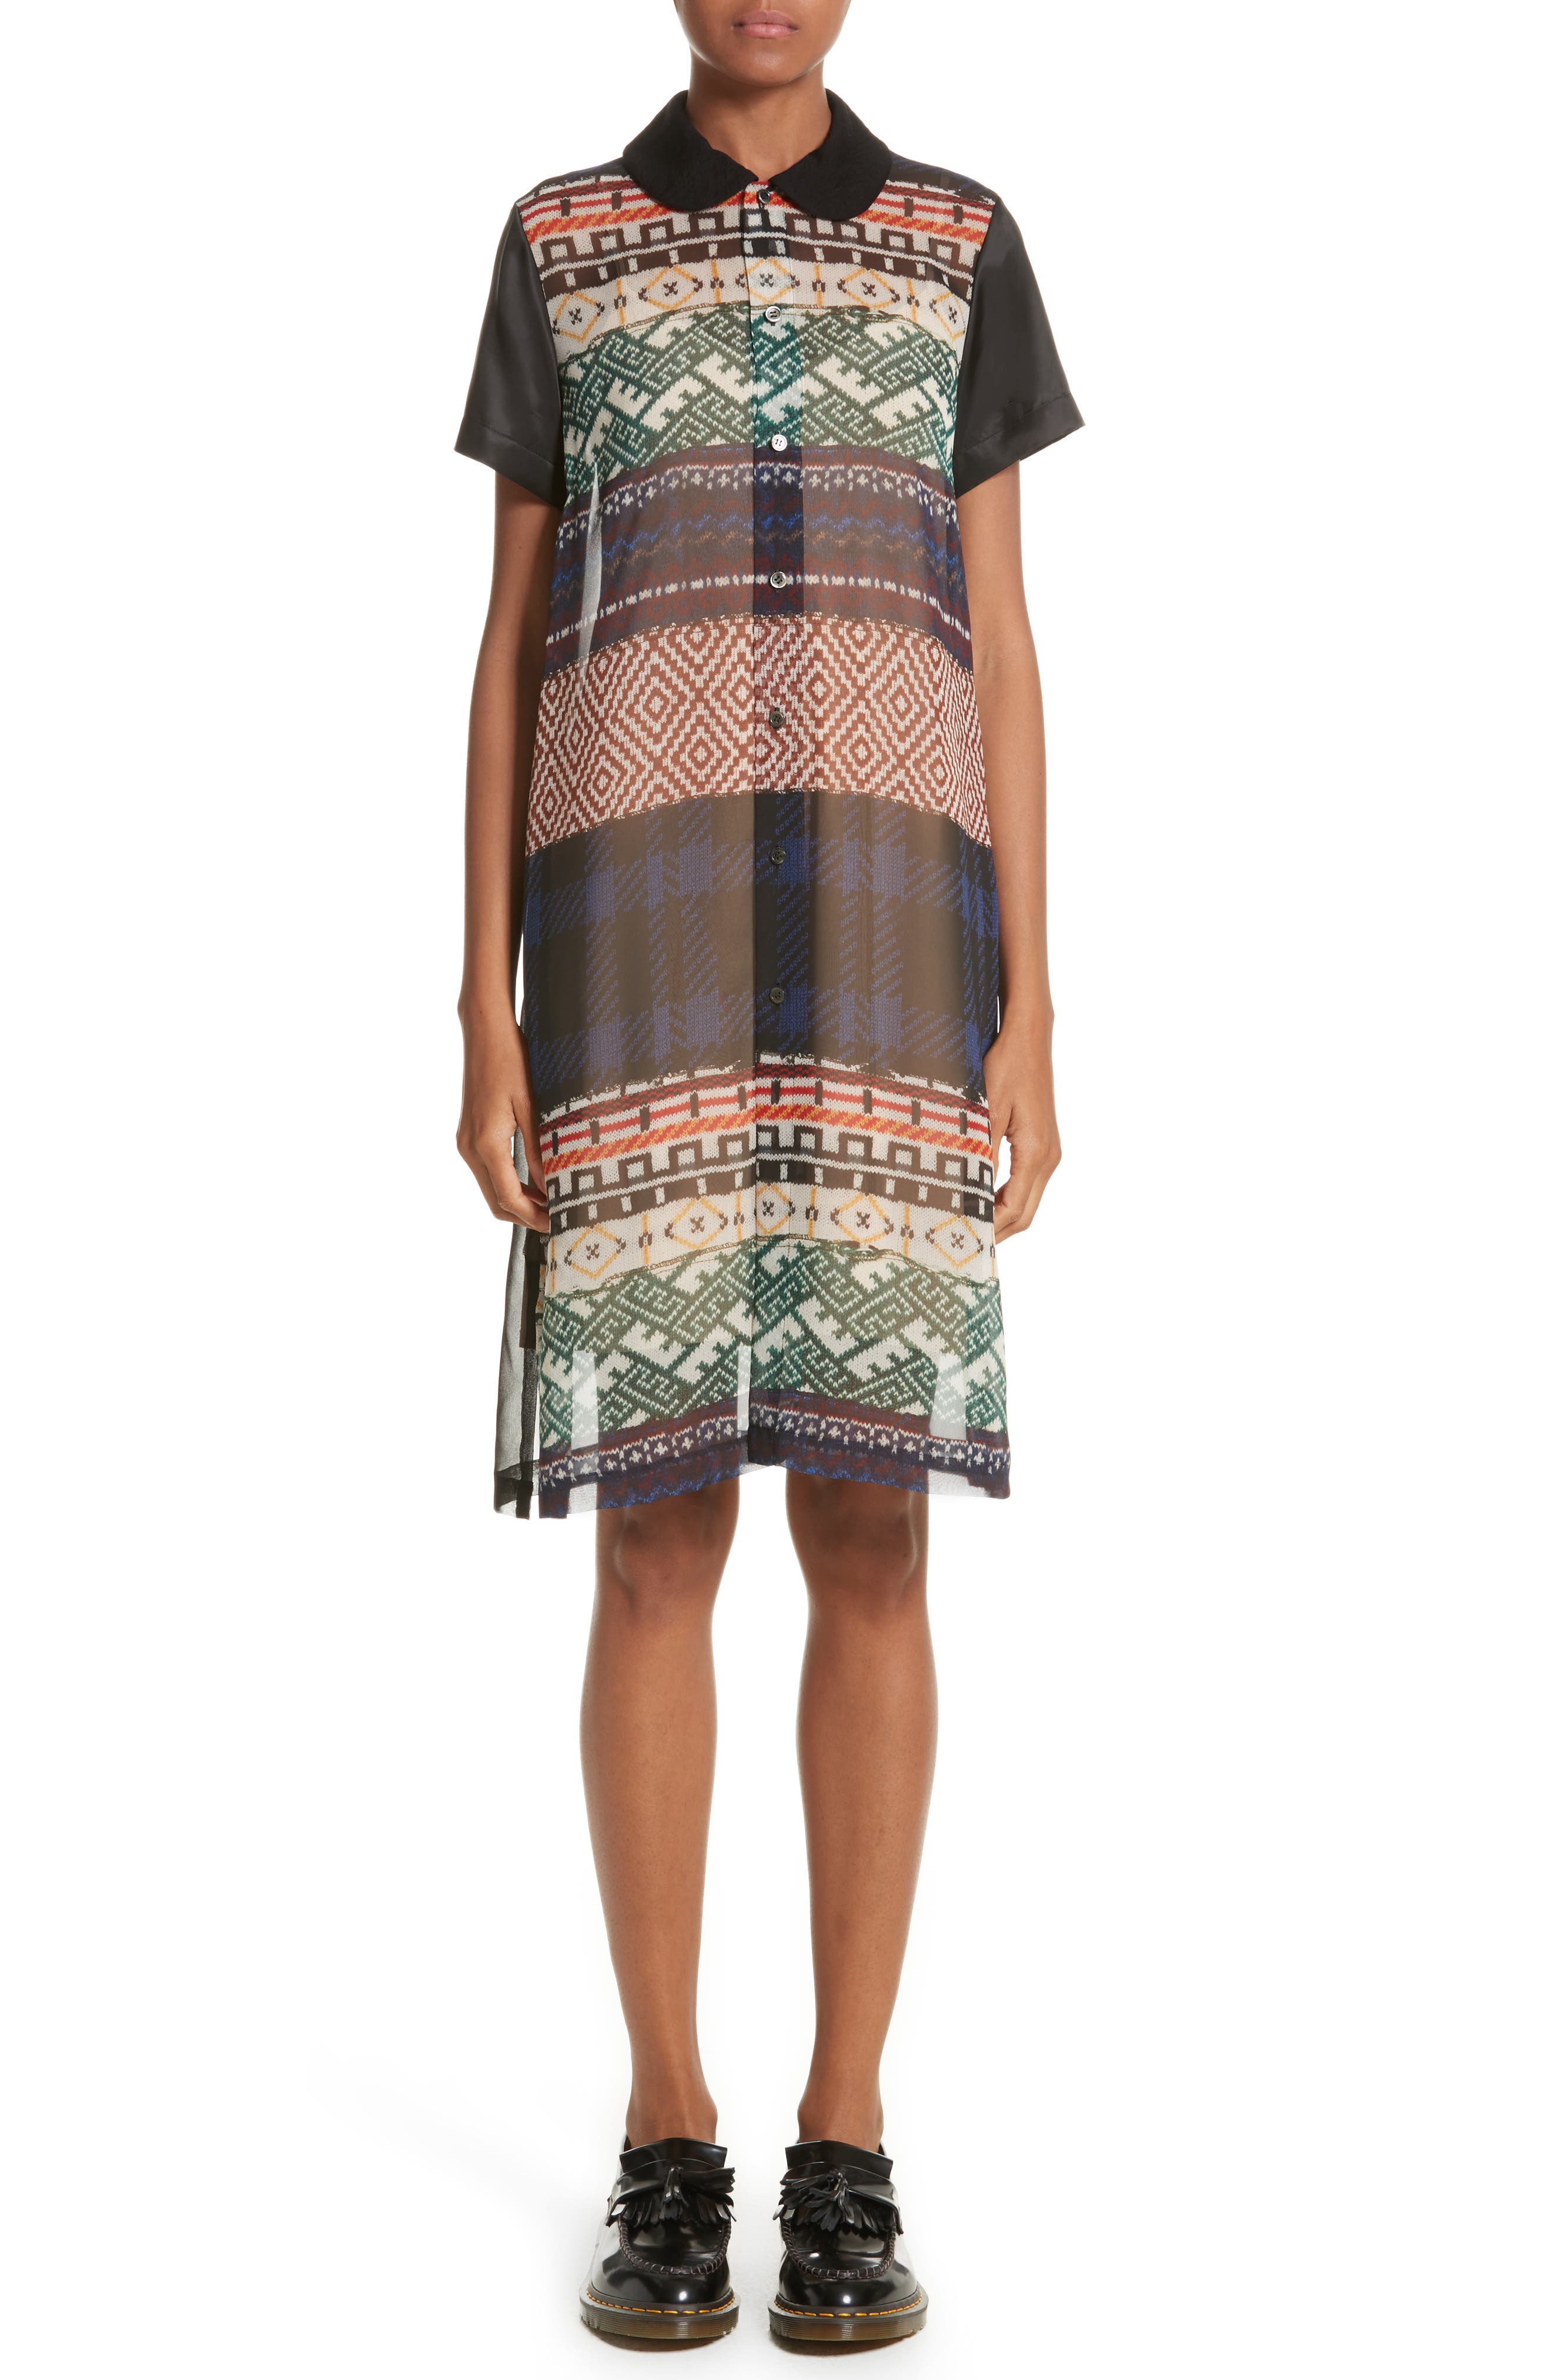 TRICOT COMME DES GARCONS MIXED PRINT SHORT SLEEVE DRESS, A PATTERN X